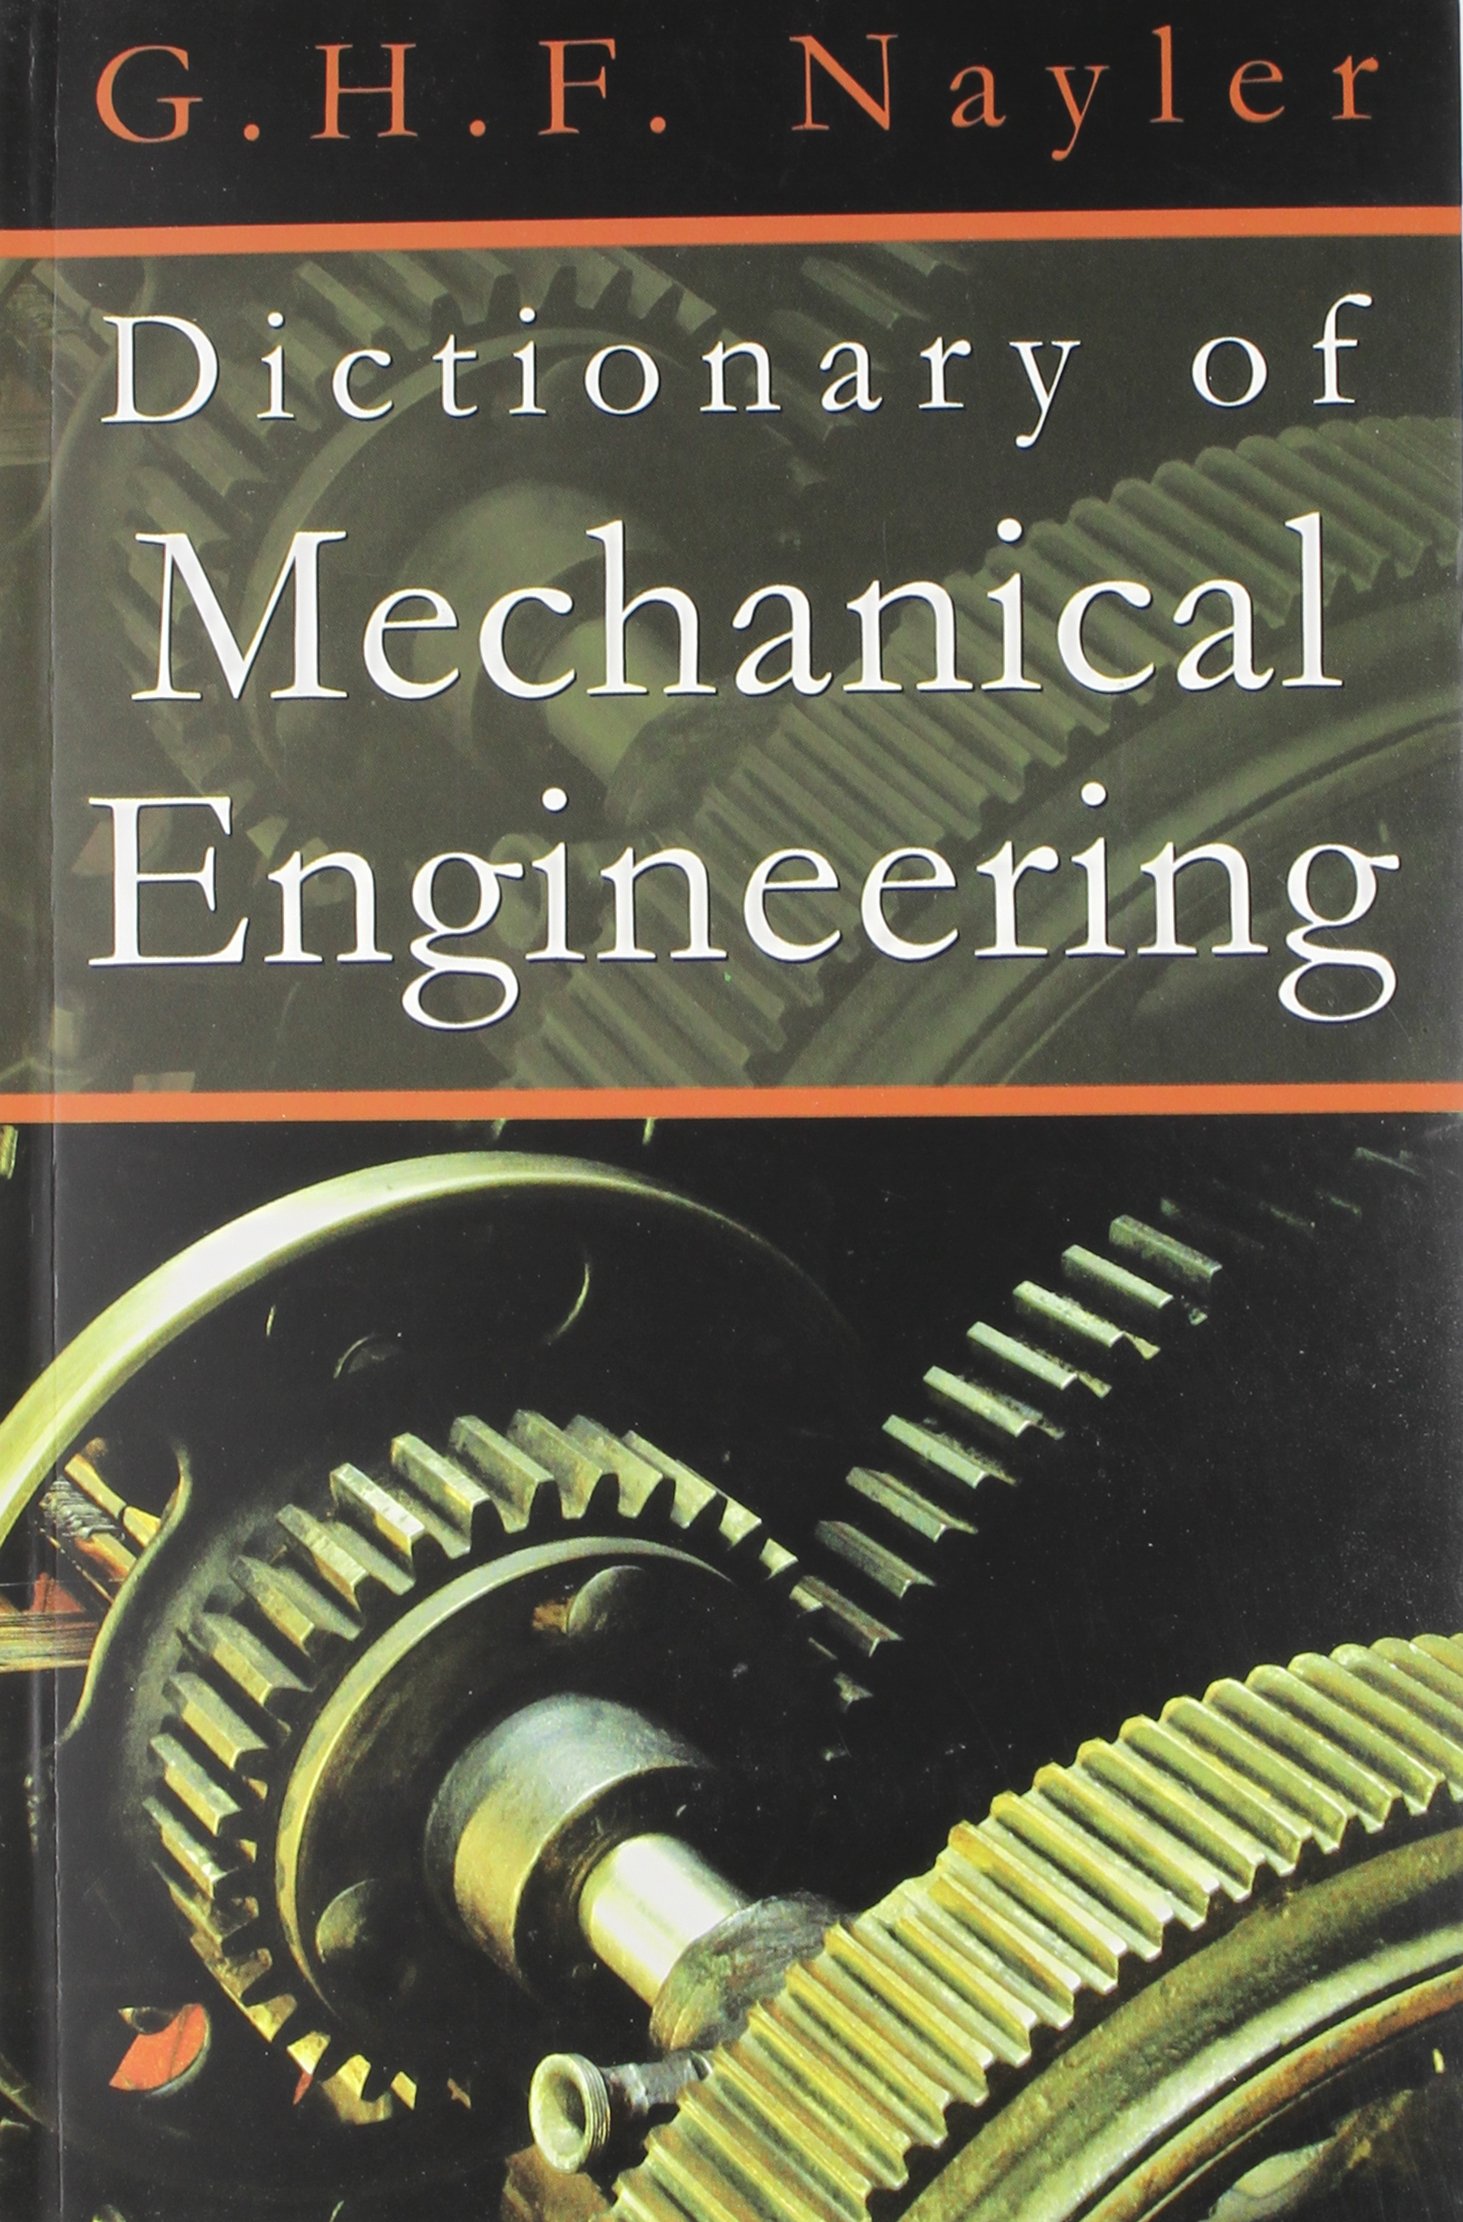 Dictionary Of Mechanical Engineering